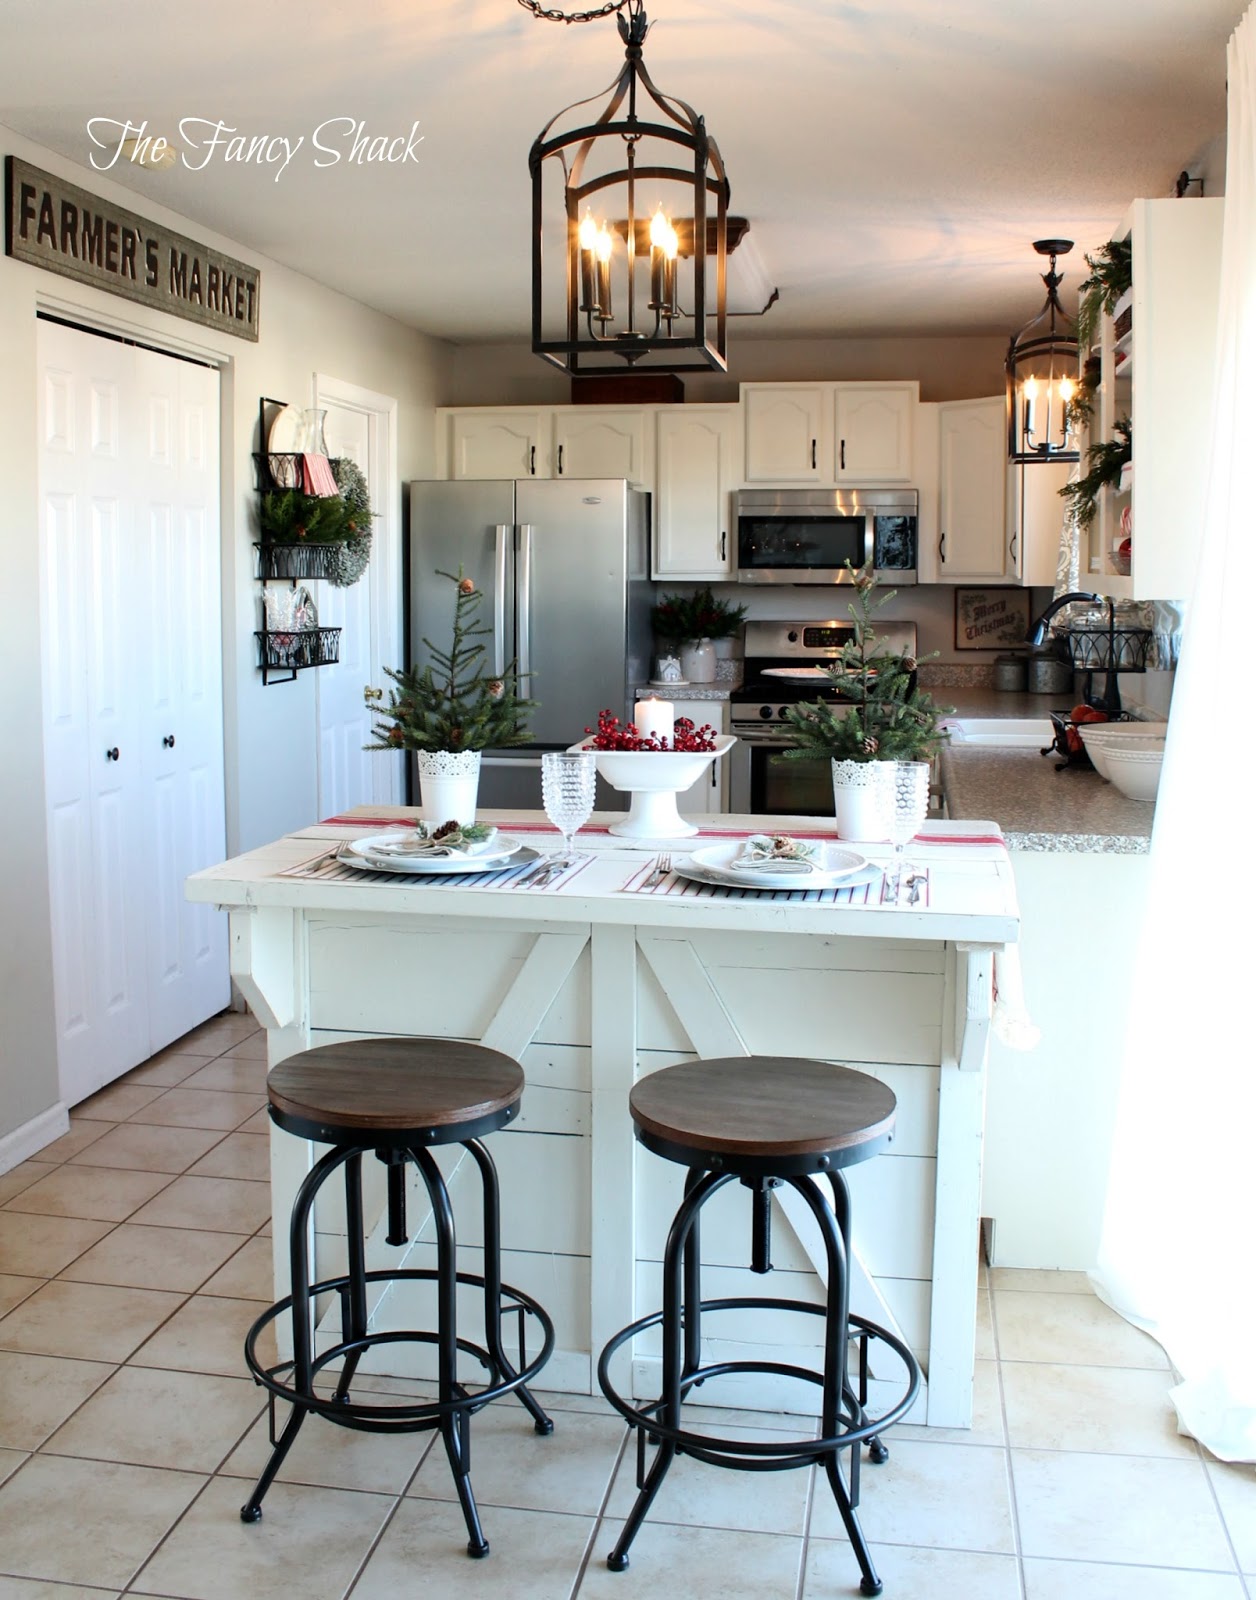 The Fancy Shack Kitchen Makeover With Annie Sloan Chalk Paint